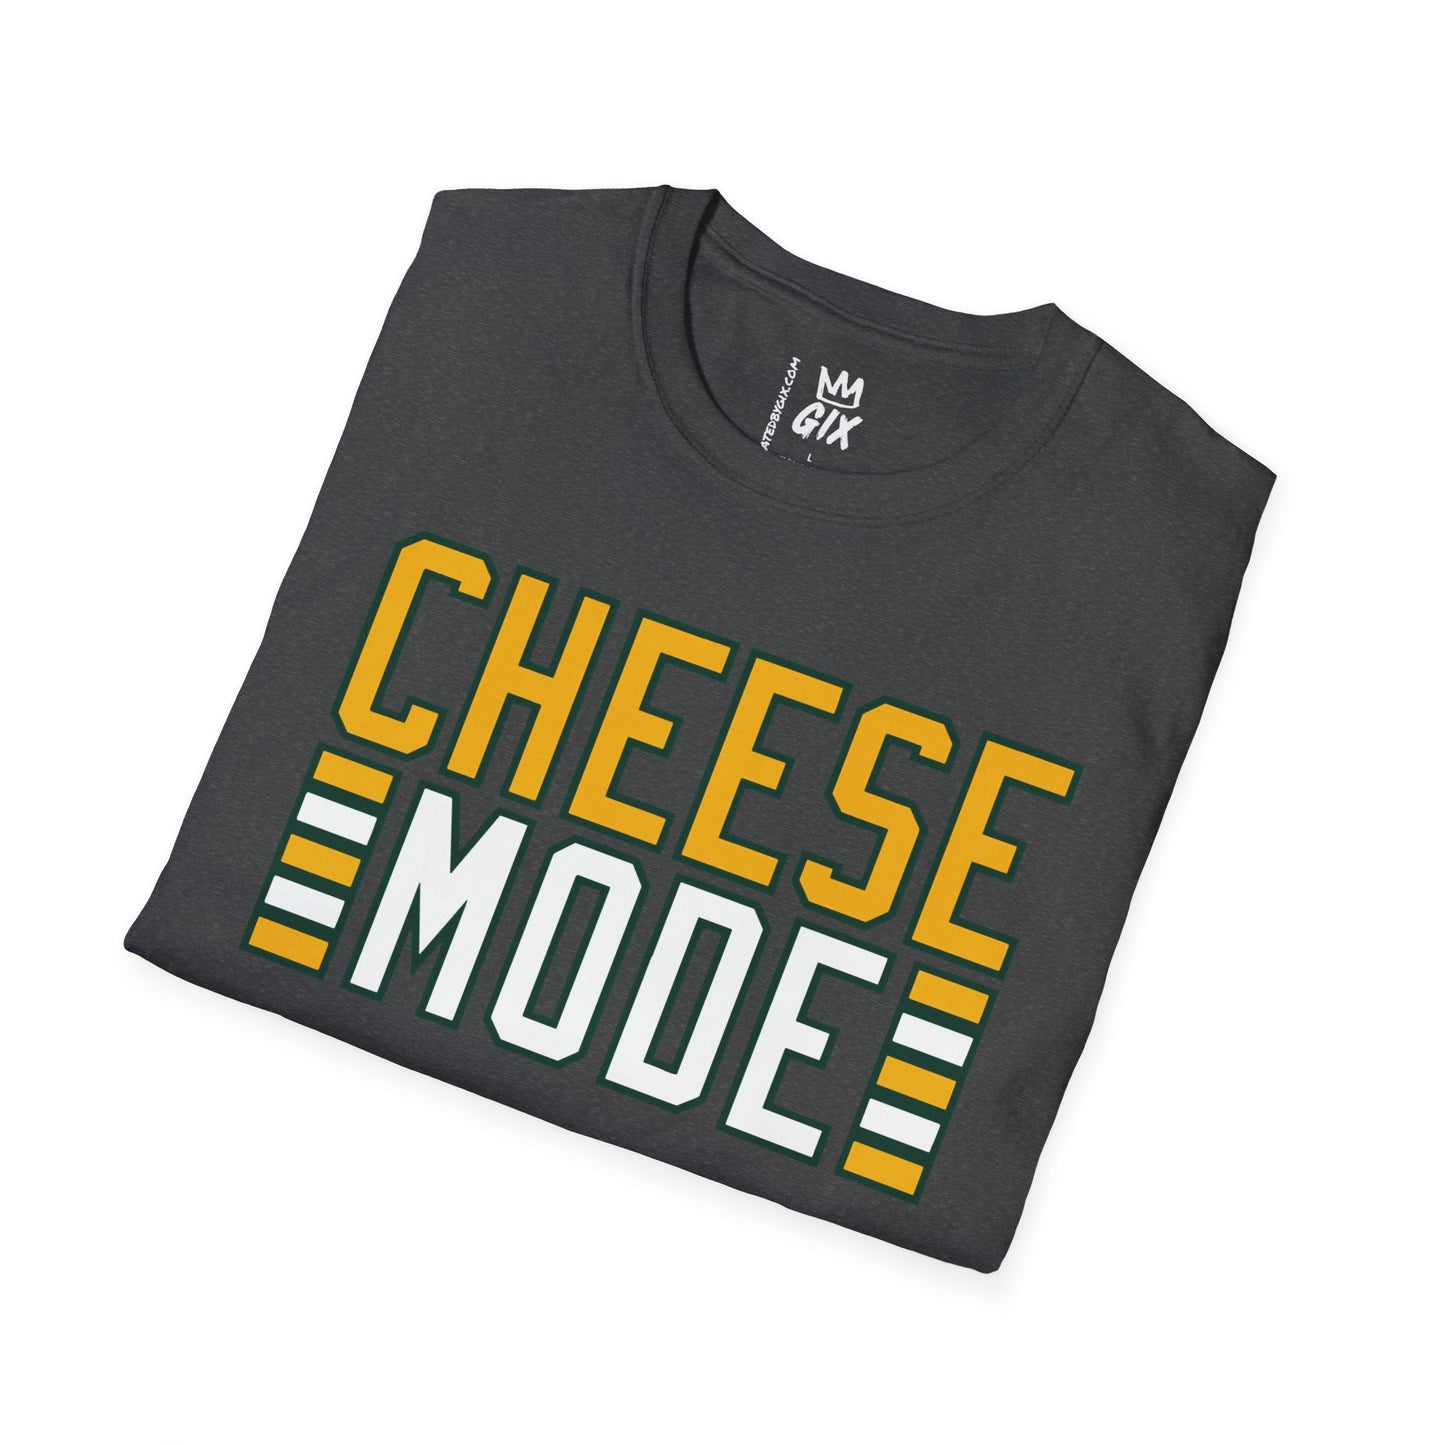 Cheese Mode Packers T-Shirt - Ultra-Soft Cotton Blend, Unisex Classic Fit